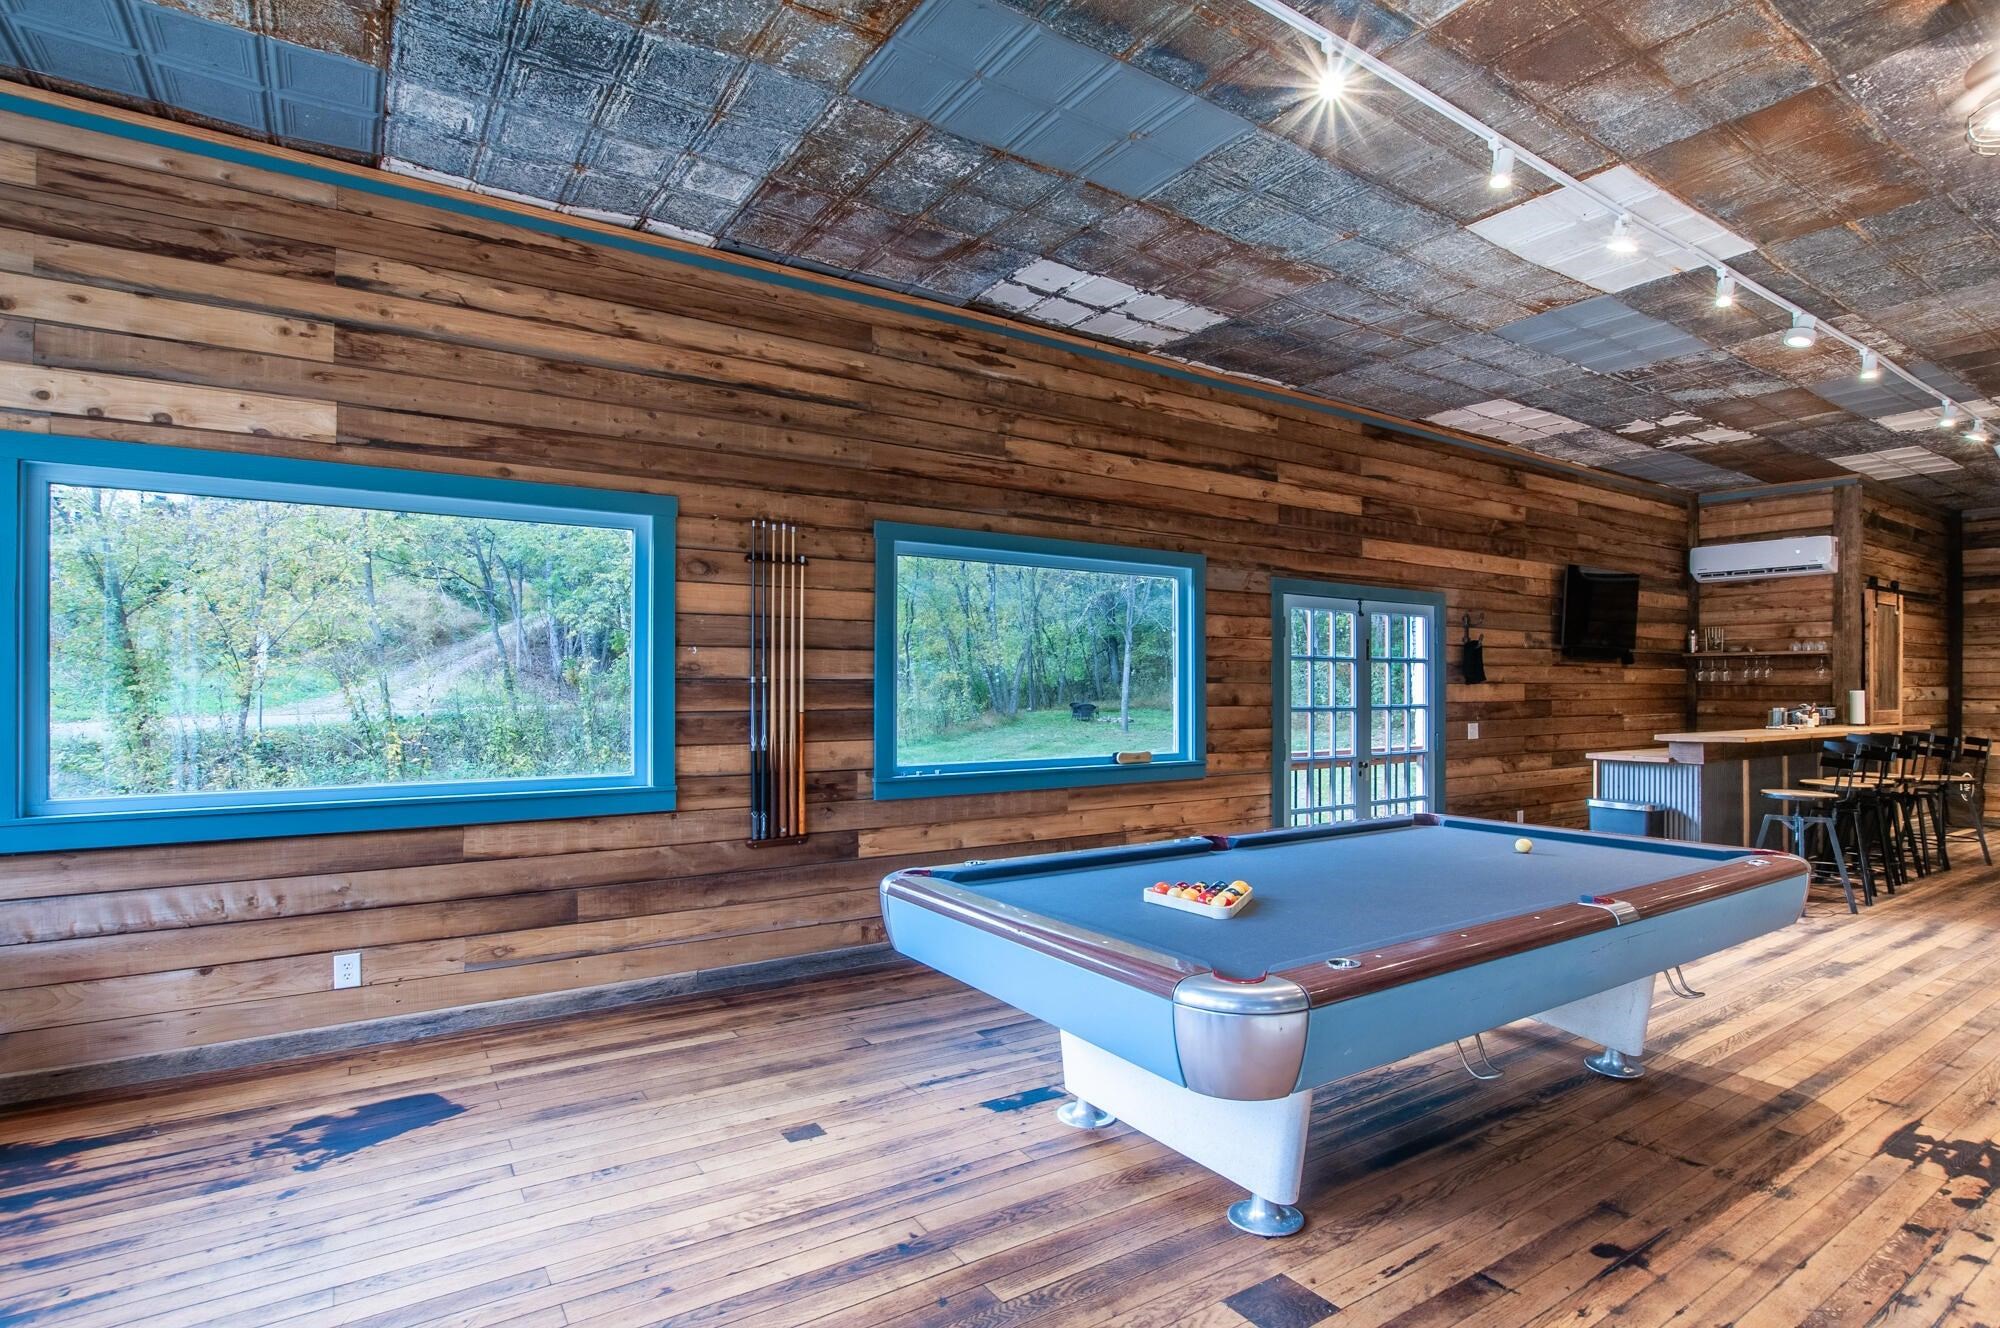 Play a game of billiards on the pool table.